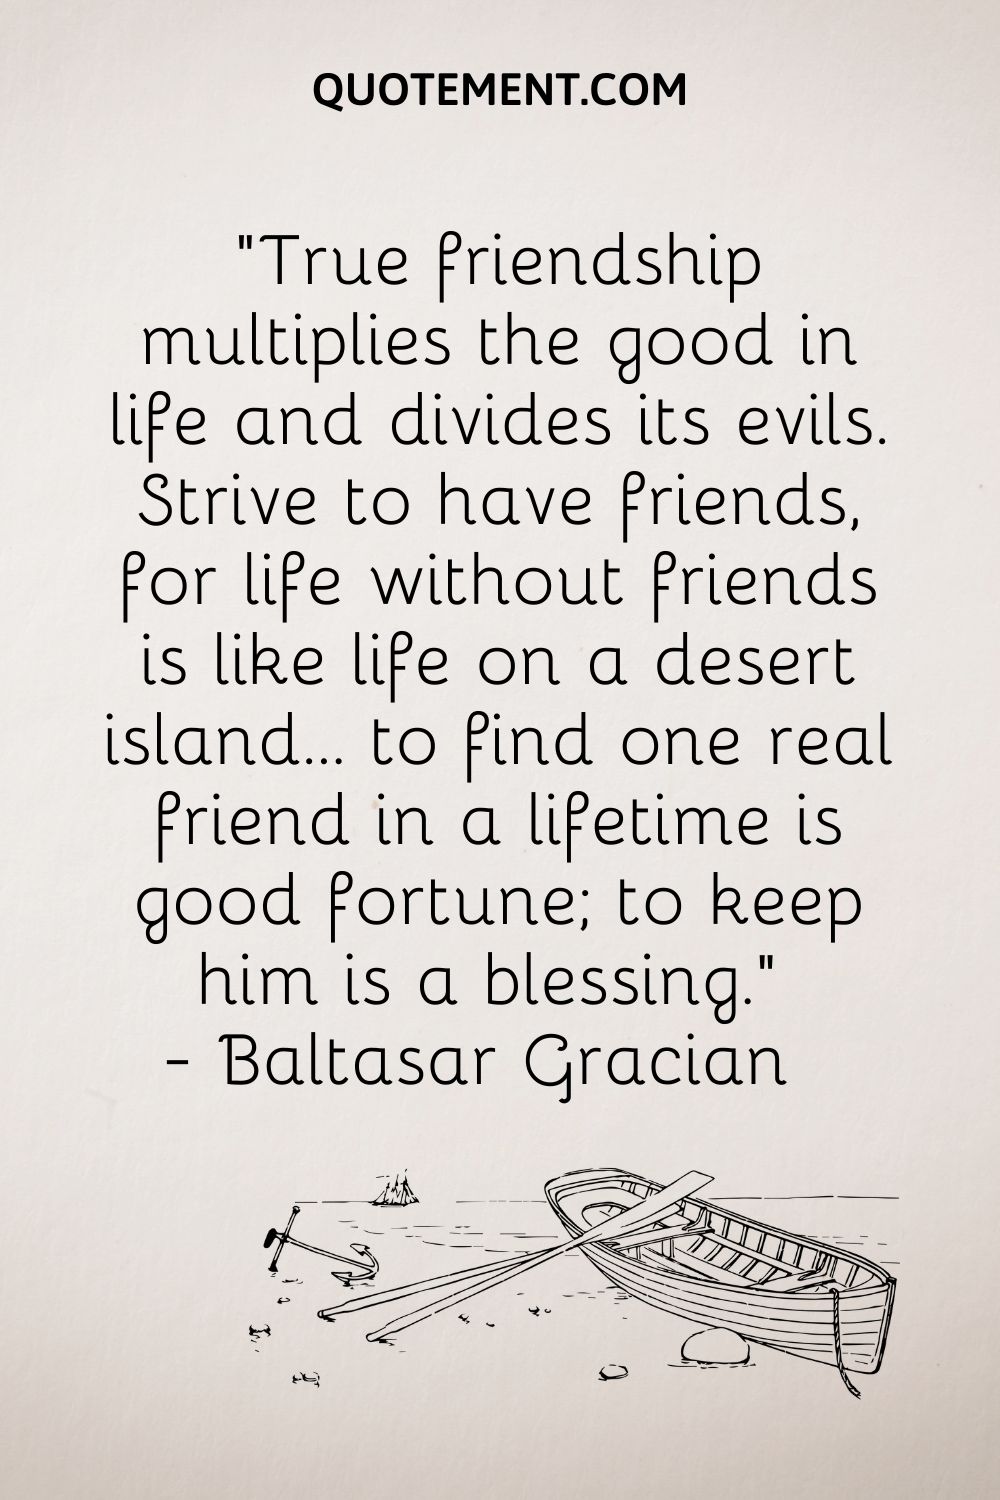 “True friendship multiplies the good in life and divides its evils. Strive to have friends, for life without friends is like life on a desert island...